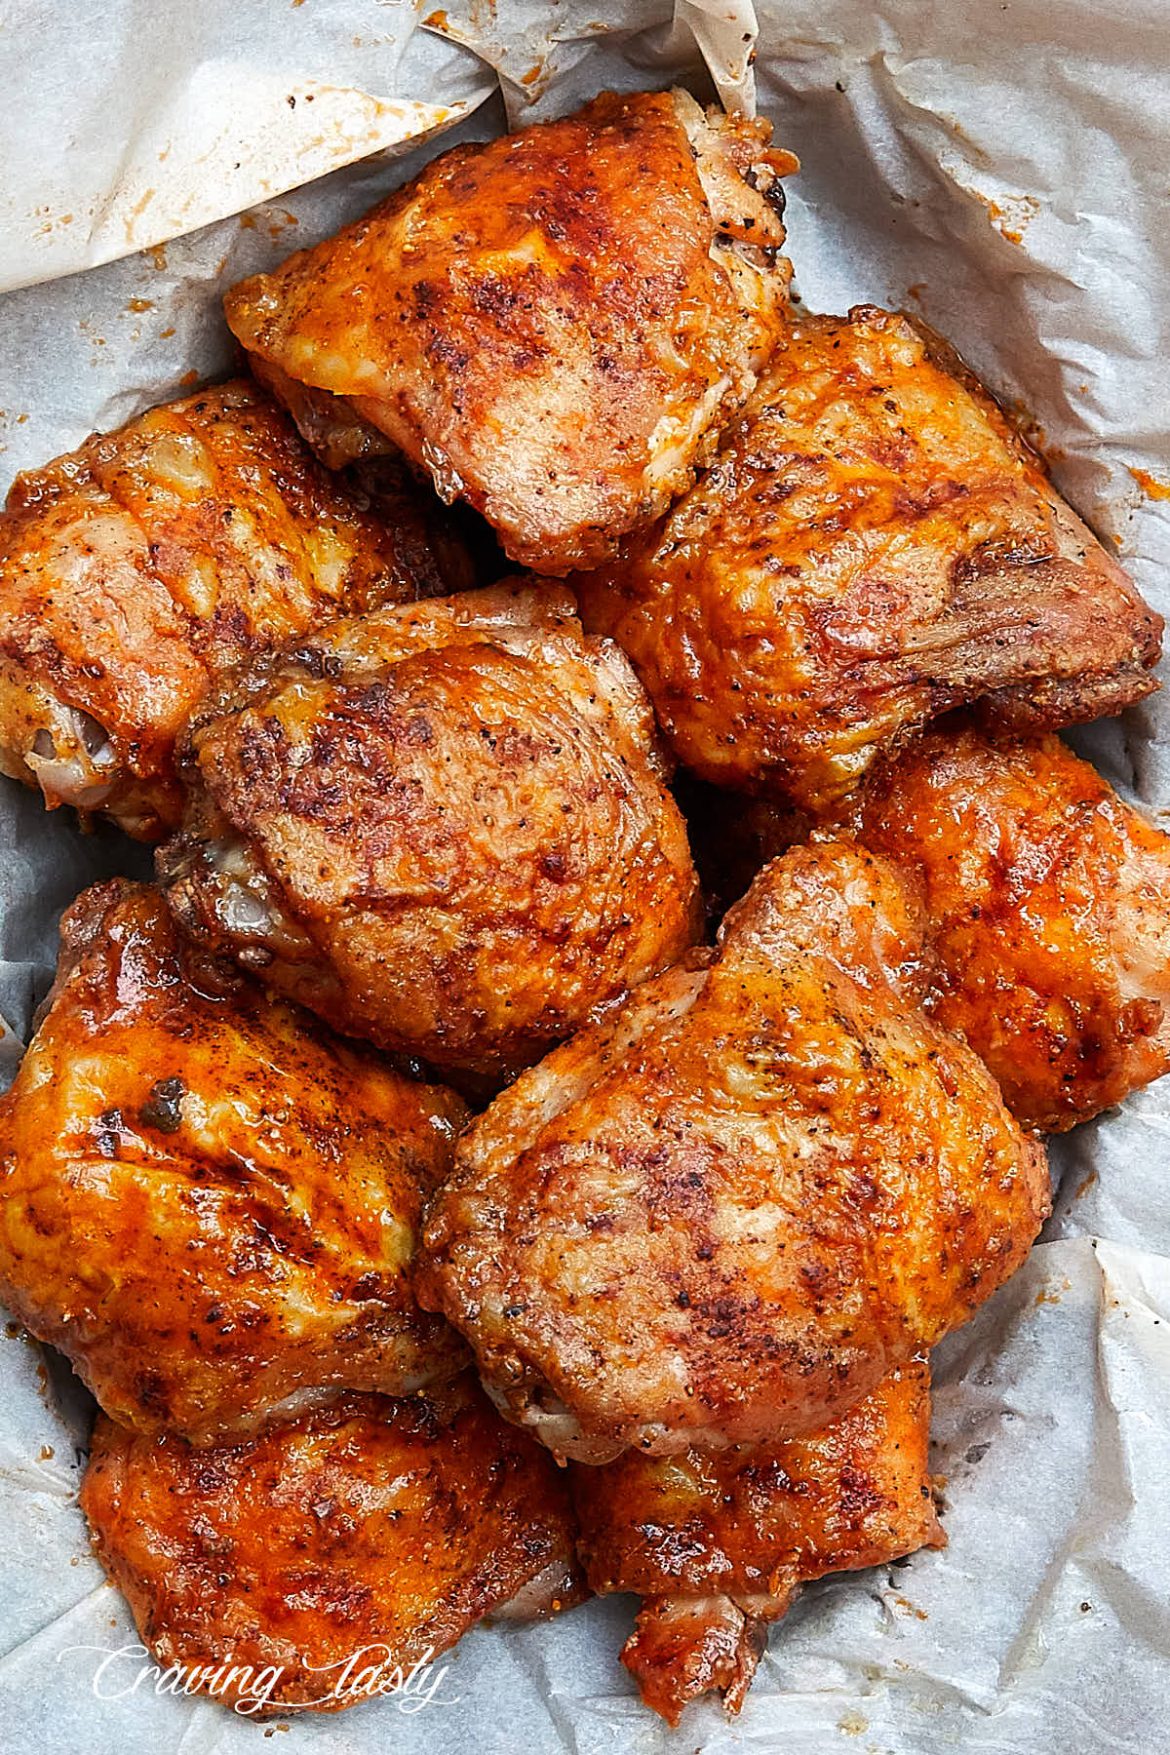 Extra Crispy Oven-Fried Chicken Thighs - Craving Tasty